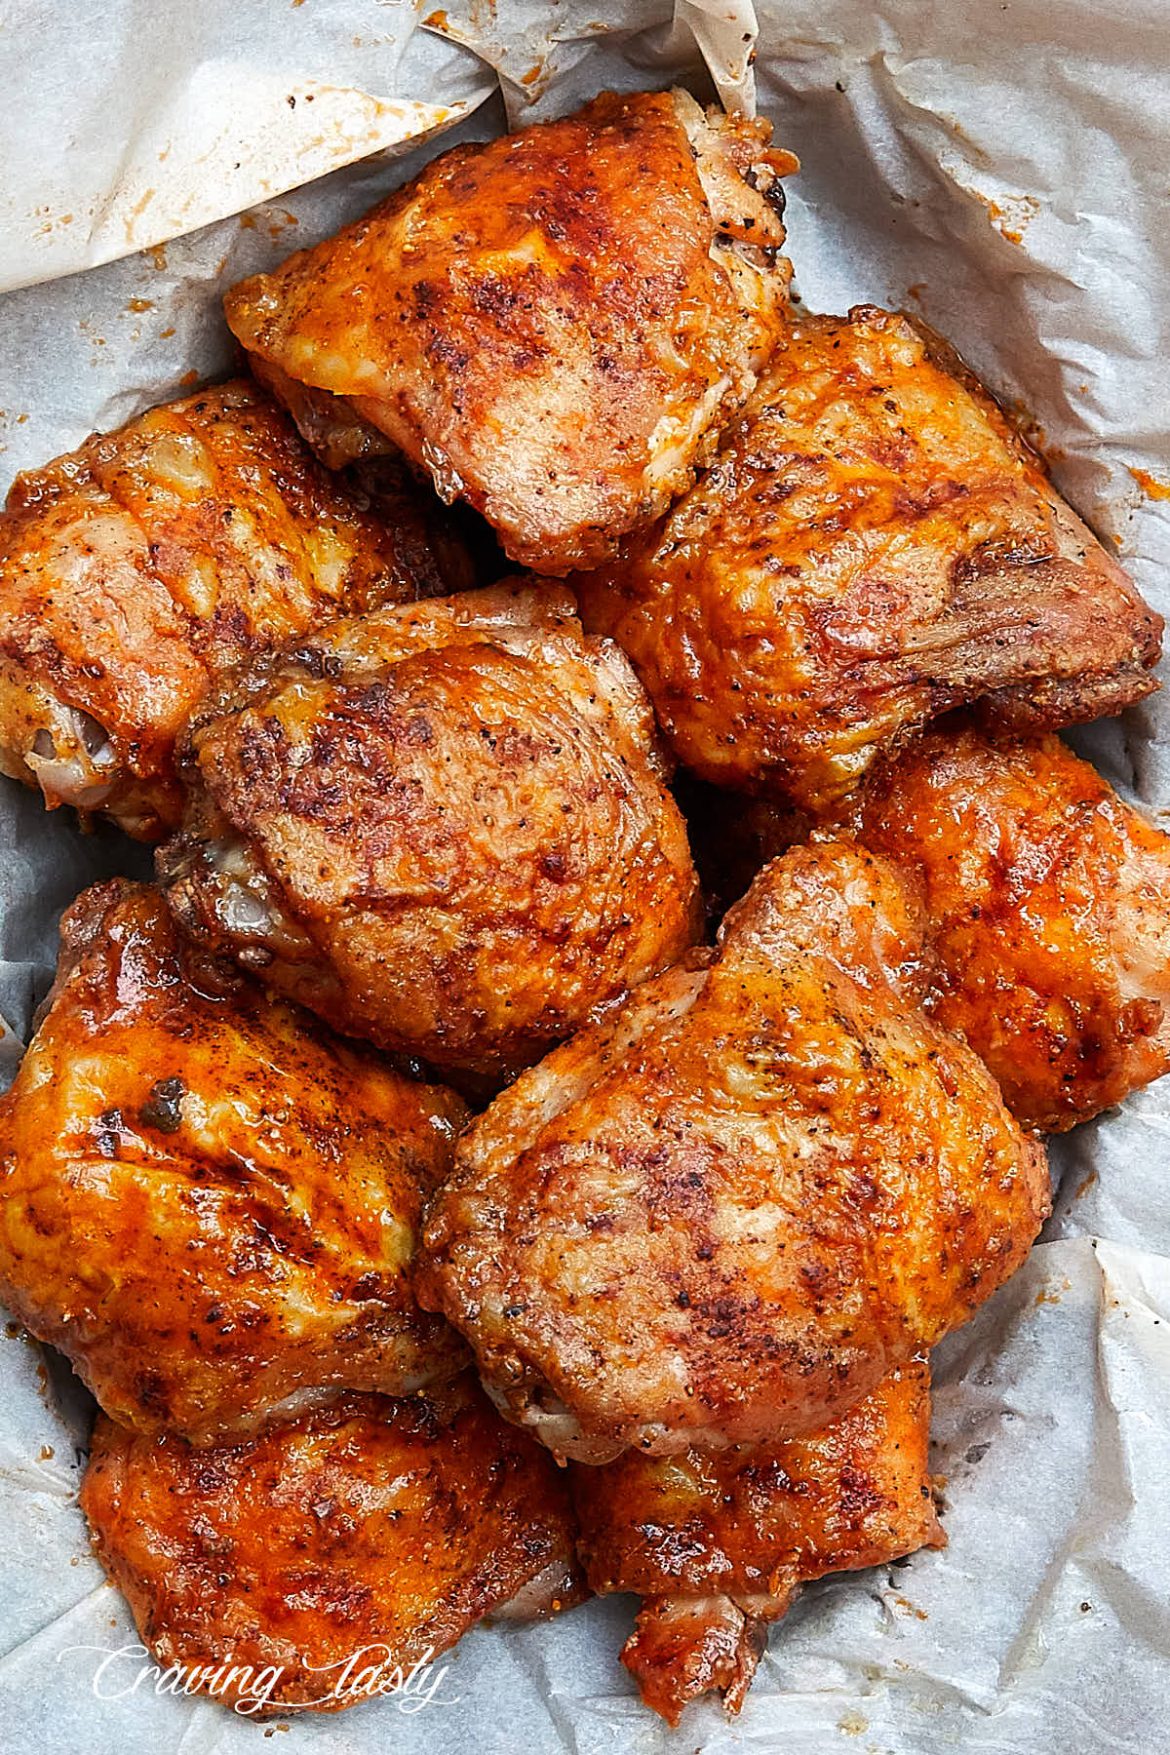 Extra Crispy Oven-Fried Chicken Thighs - Craving Tasty